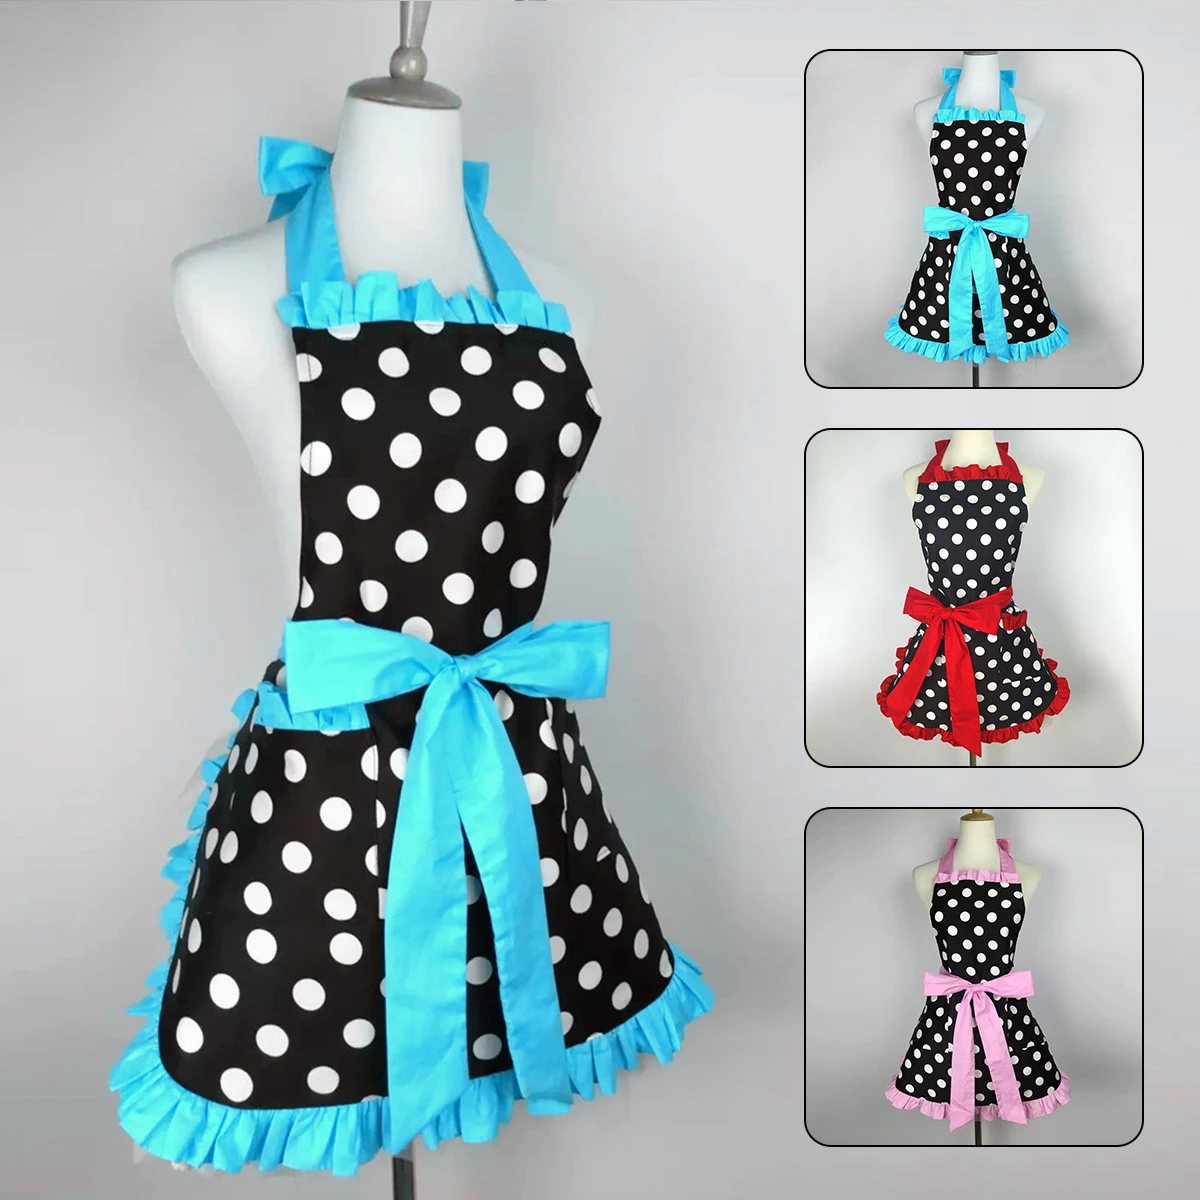 

Cute Apron Retro Polka Dot Aprons Ruffle Side Vintage Cooking Aprons with Pockets Adjustable Kitchen Aprons for Women Girls